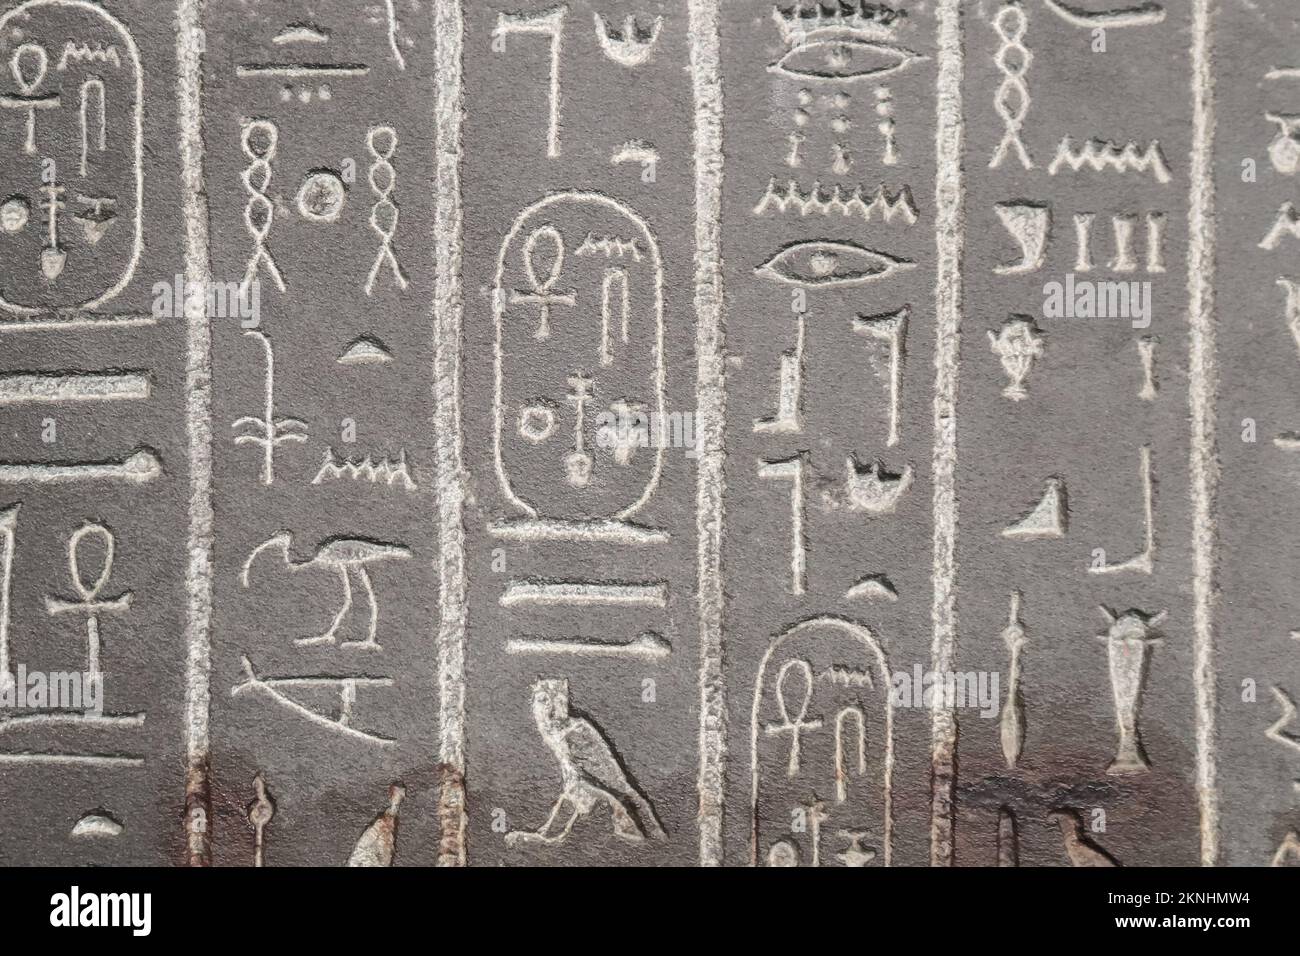 Carved ancient Egyptian writing or hieroglyphics-sacred carvings or mdju netjer meaning words of the gods Stock Photo